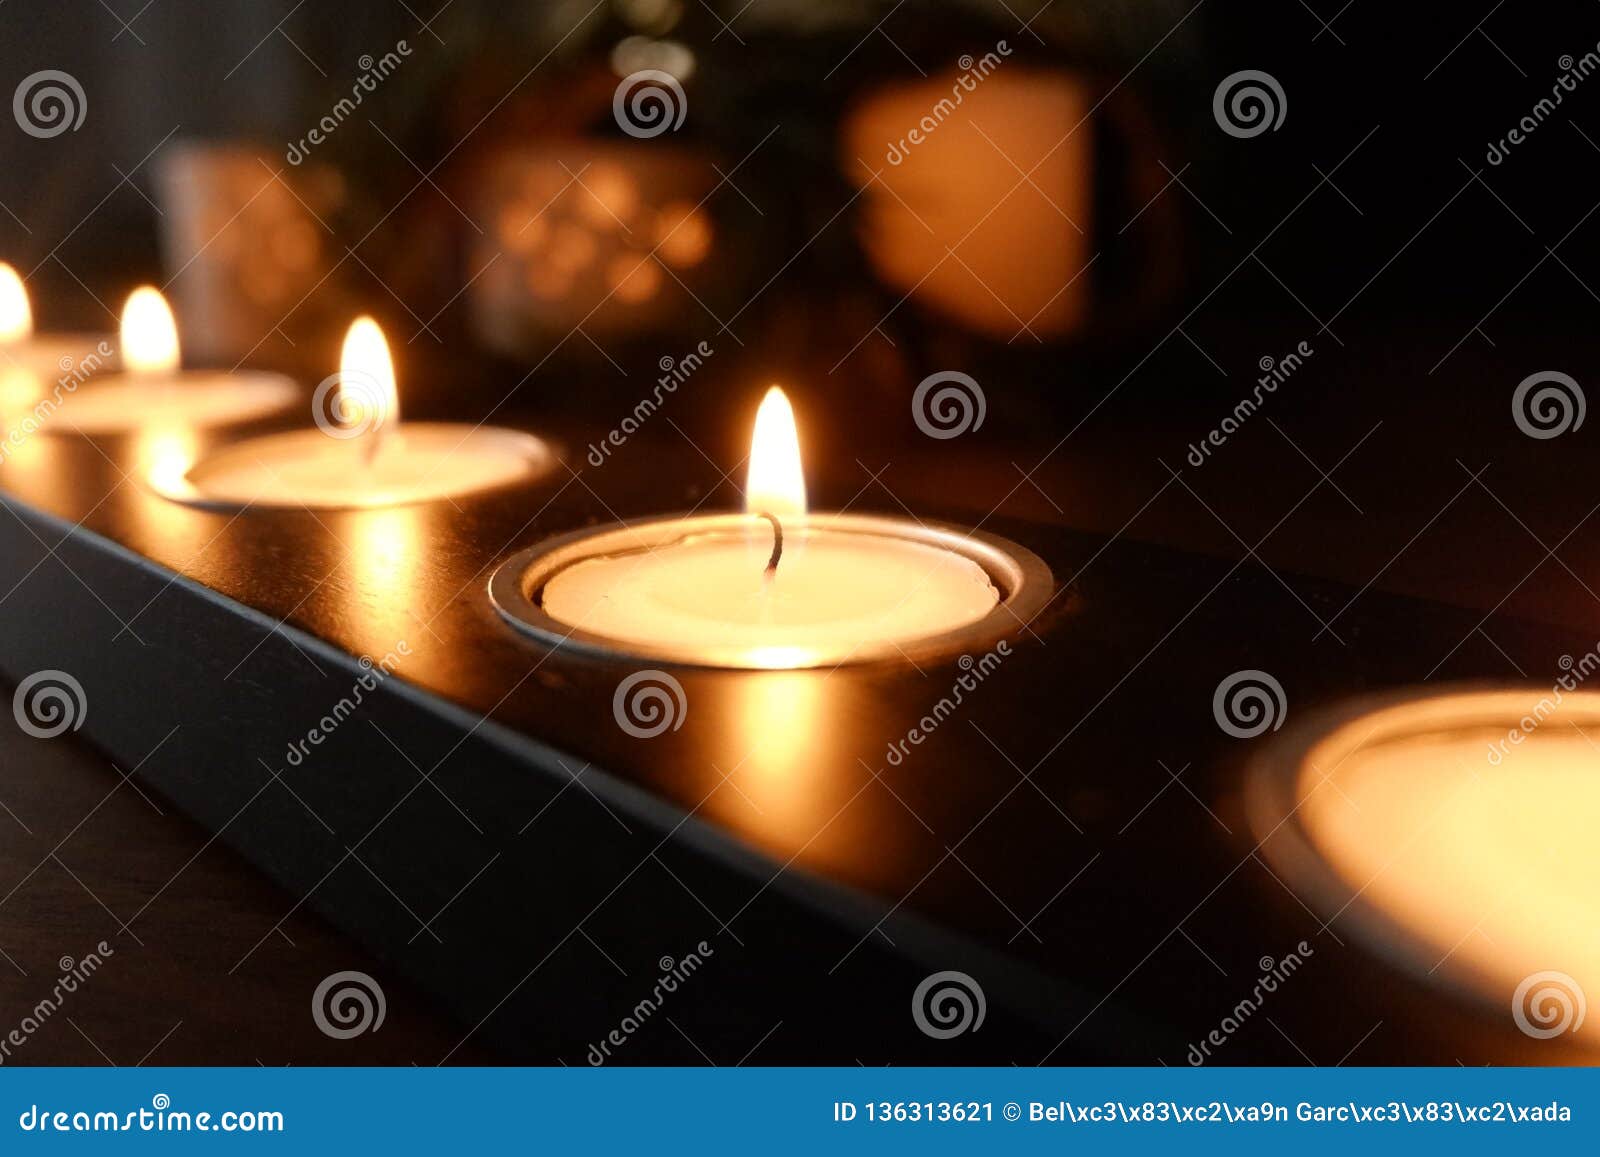 Candles For A Warm Illumination Stock Image - Image of home, antique ...